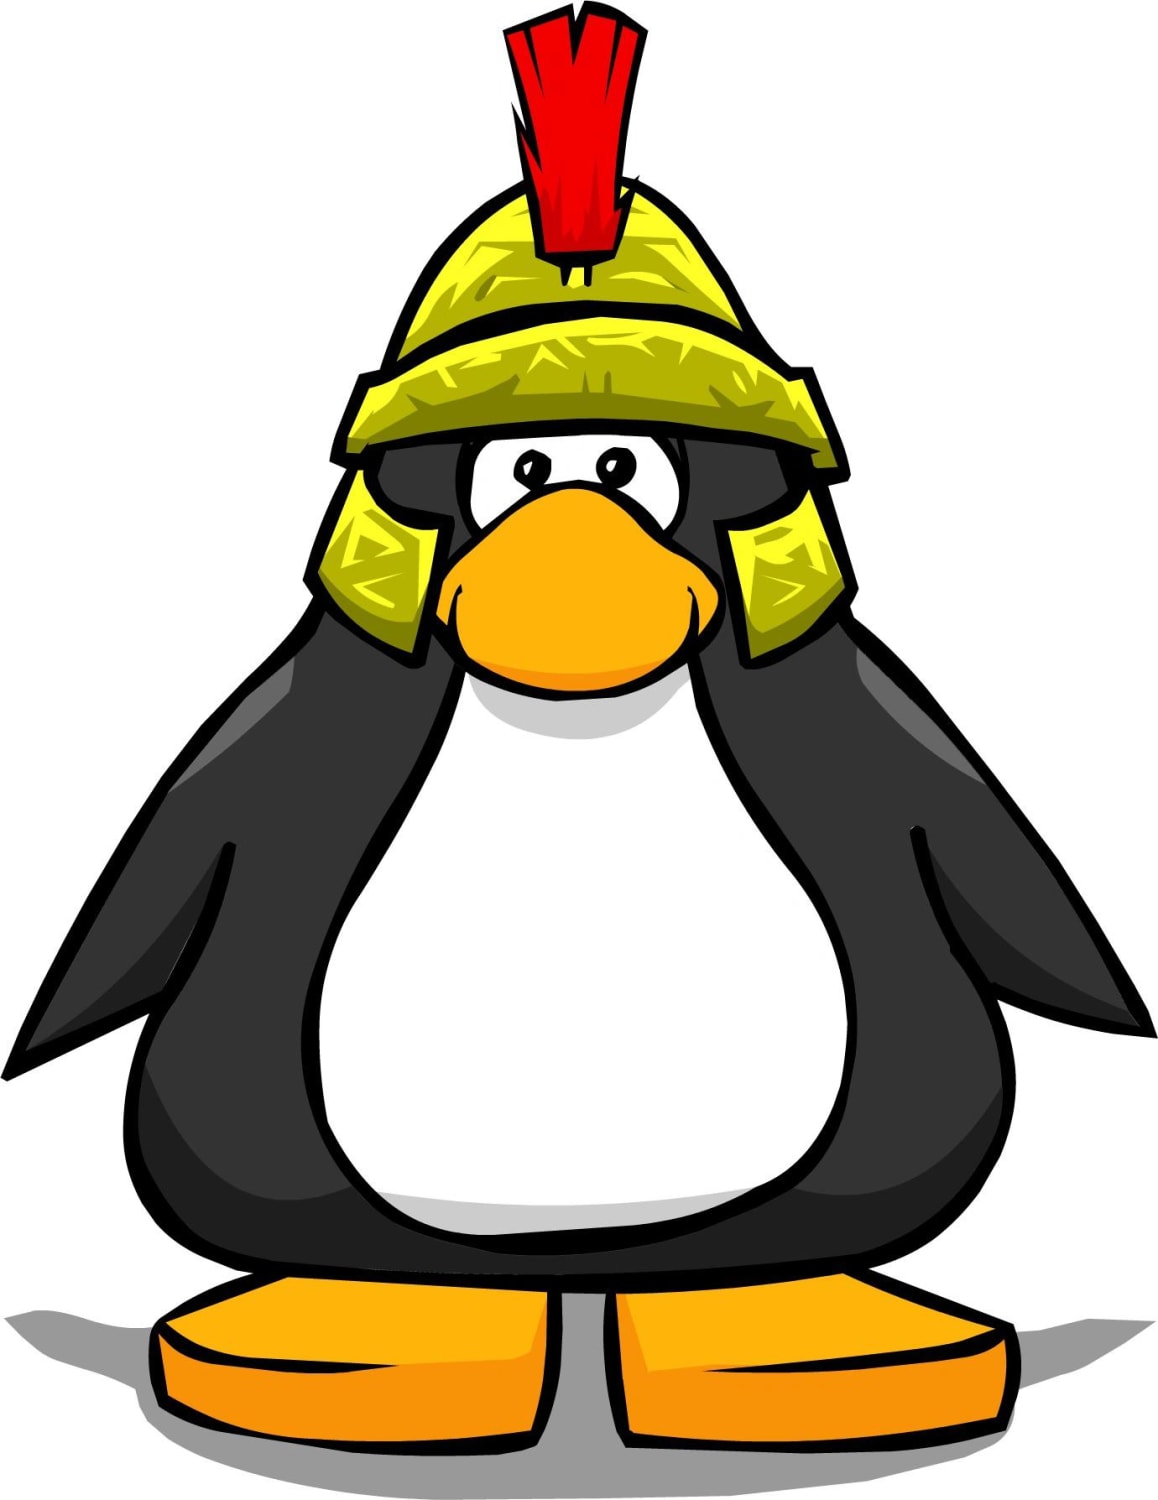 Since penguins are among the gayest animals, and the Roman army was among the gayest armies, I present the newest LGBTQIA+ icon!